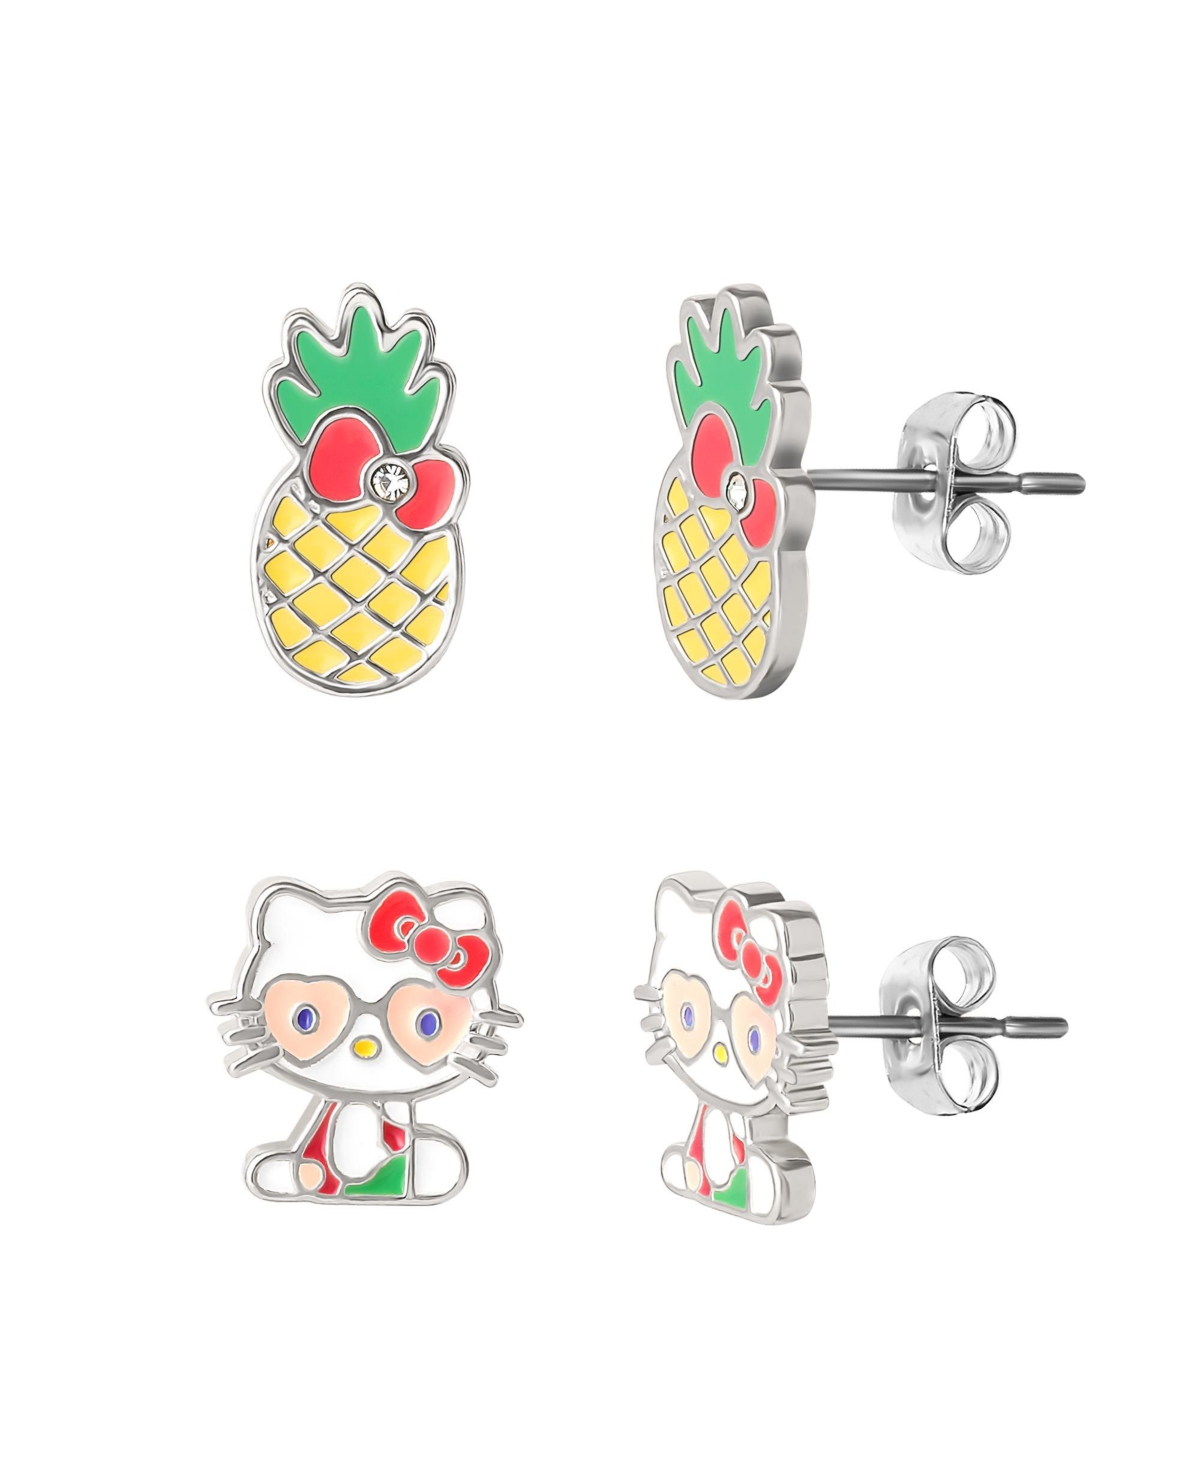 Sanrio Silver Plated Pineapple Earring Set - Yellow, white, green